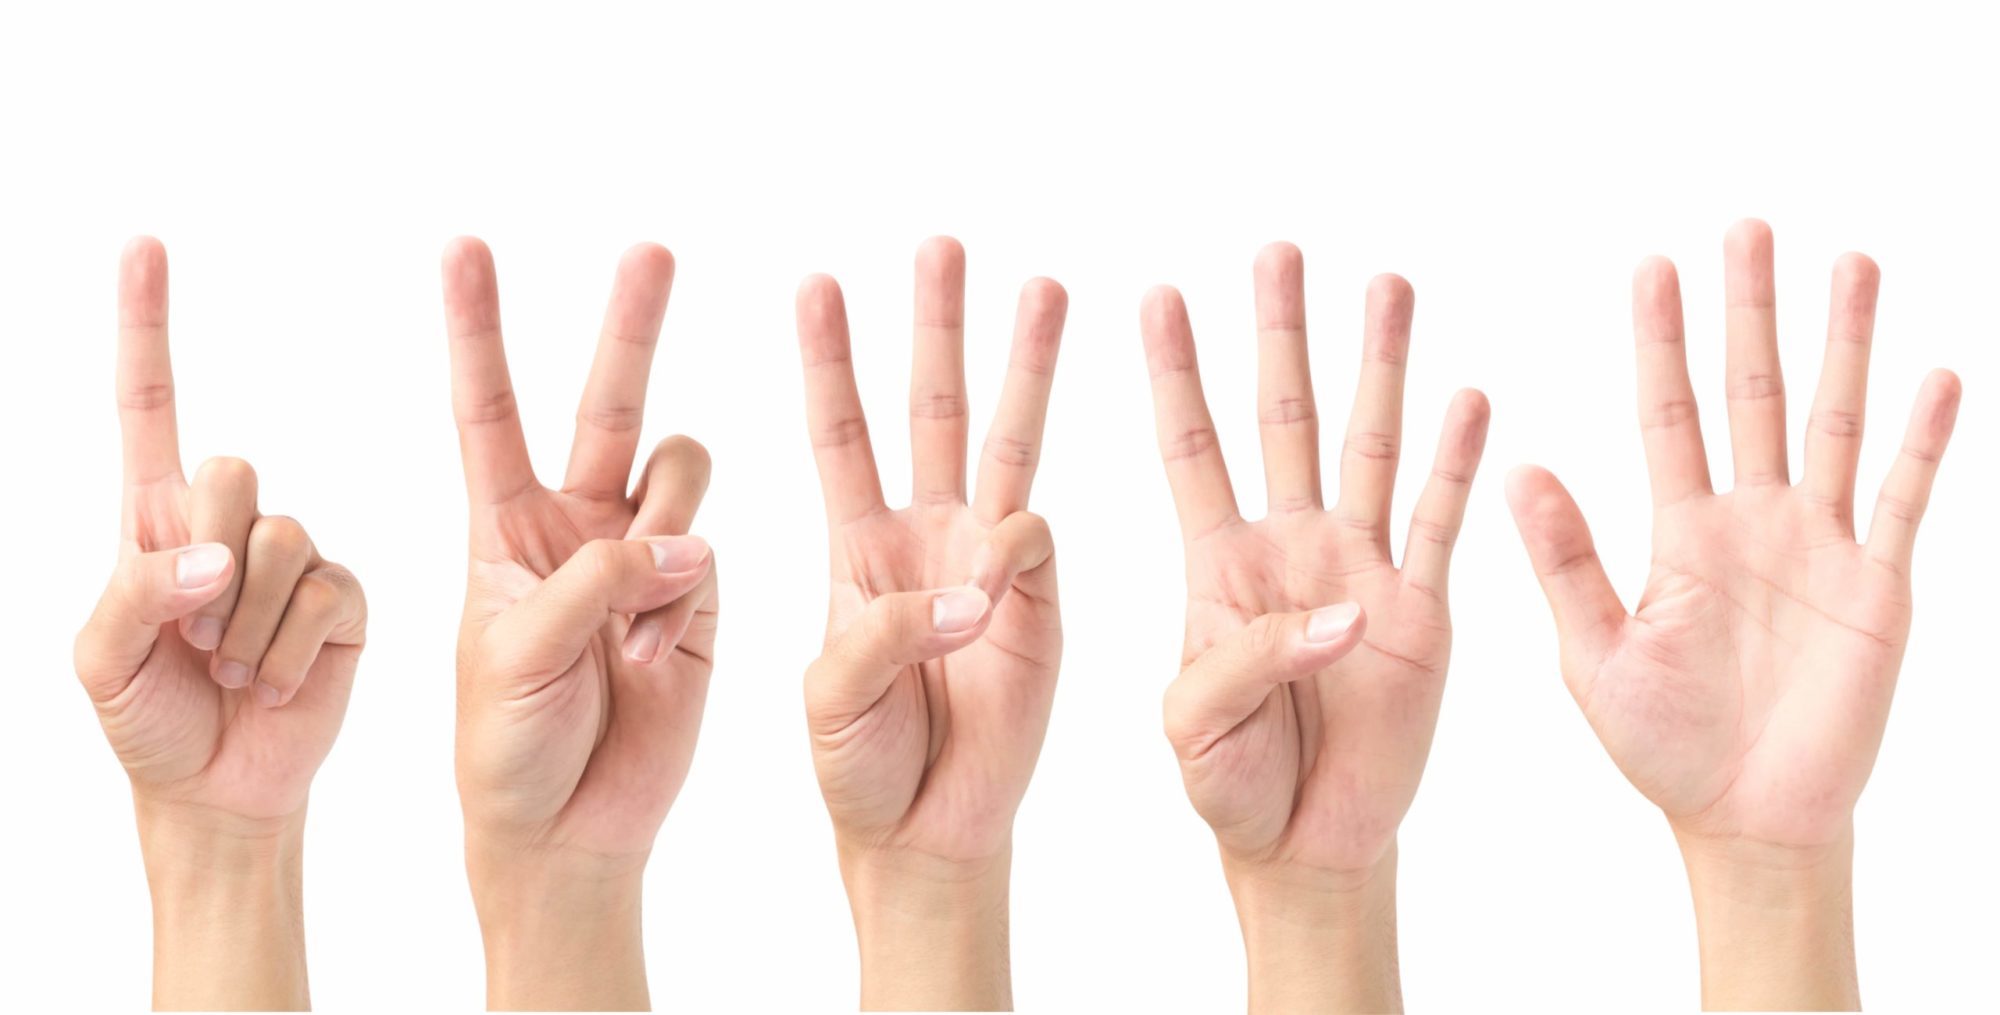 Hands counting numbers from 1 to 5